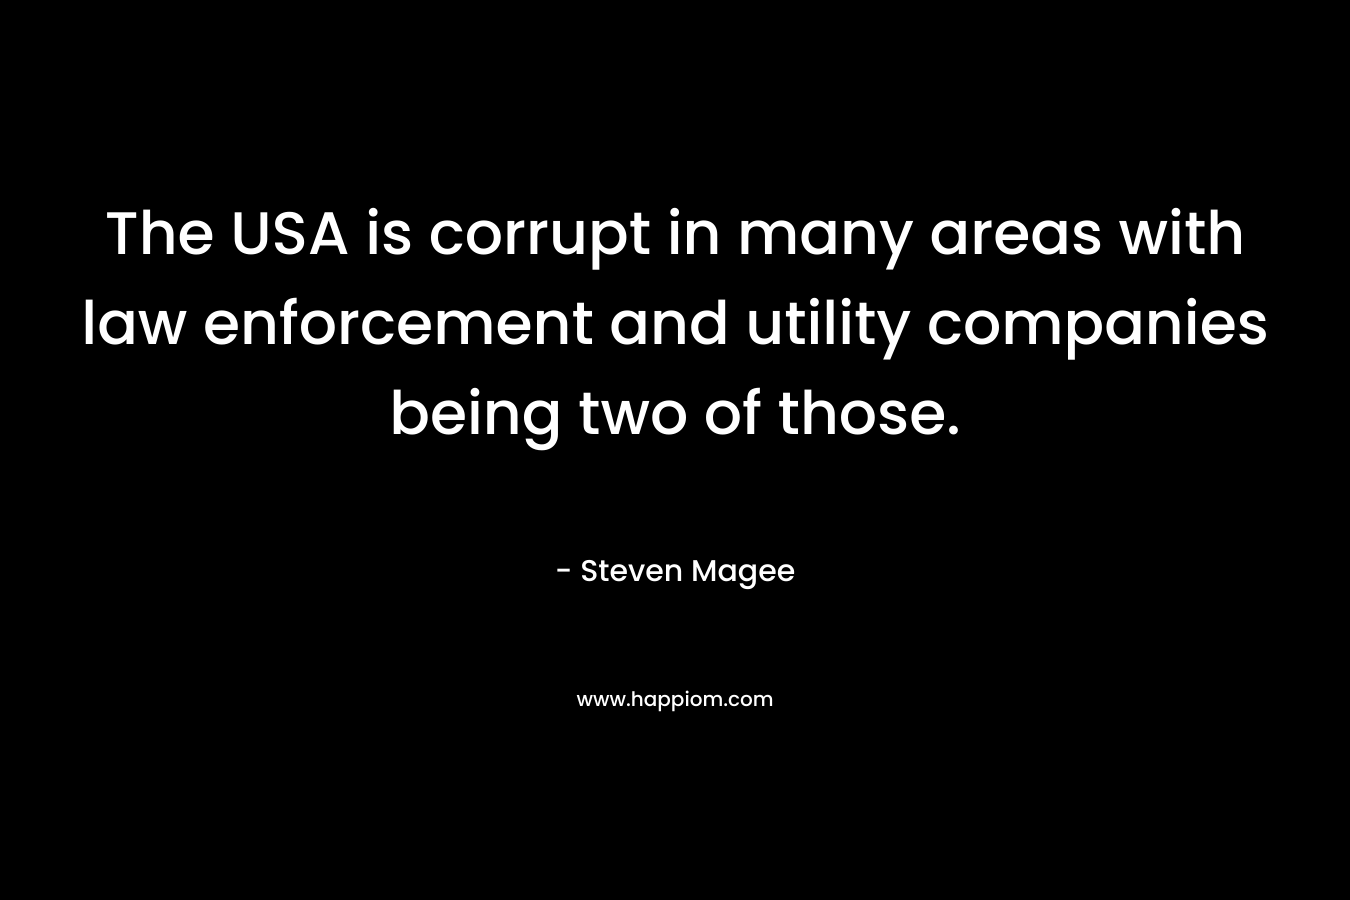 The USA is corrupt in many areas with law enforcement and utility companies being two of those. – Steven Magee